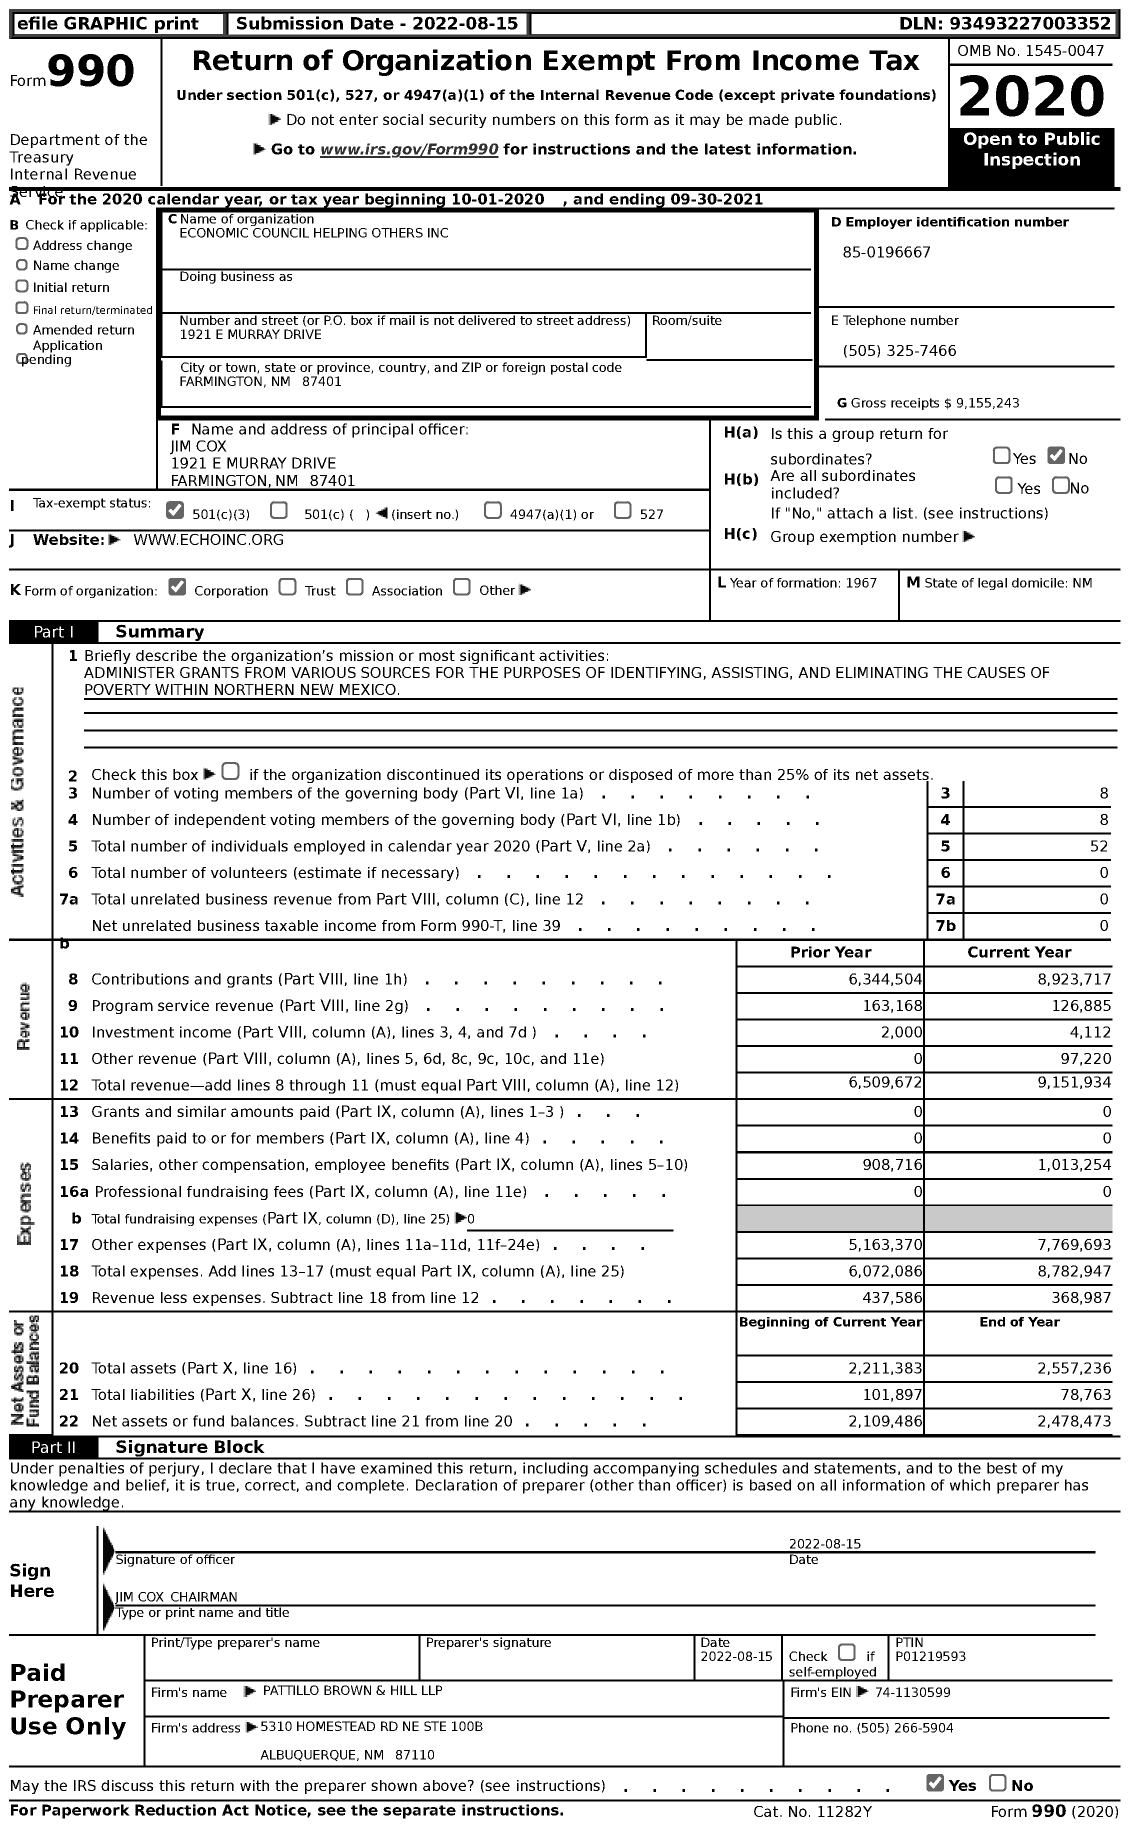 Image of first page of 2020 Form 990 for Economic Council Helping Others